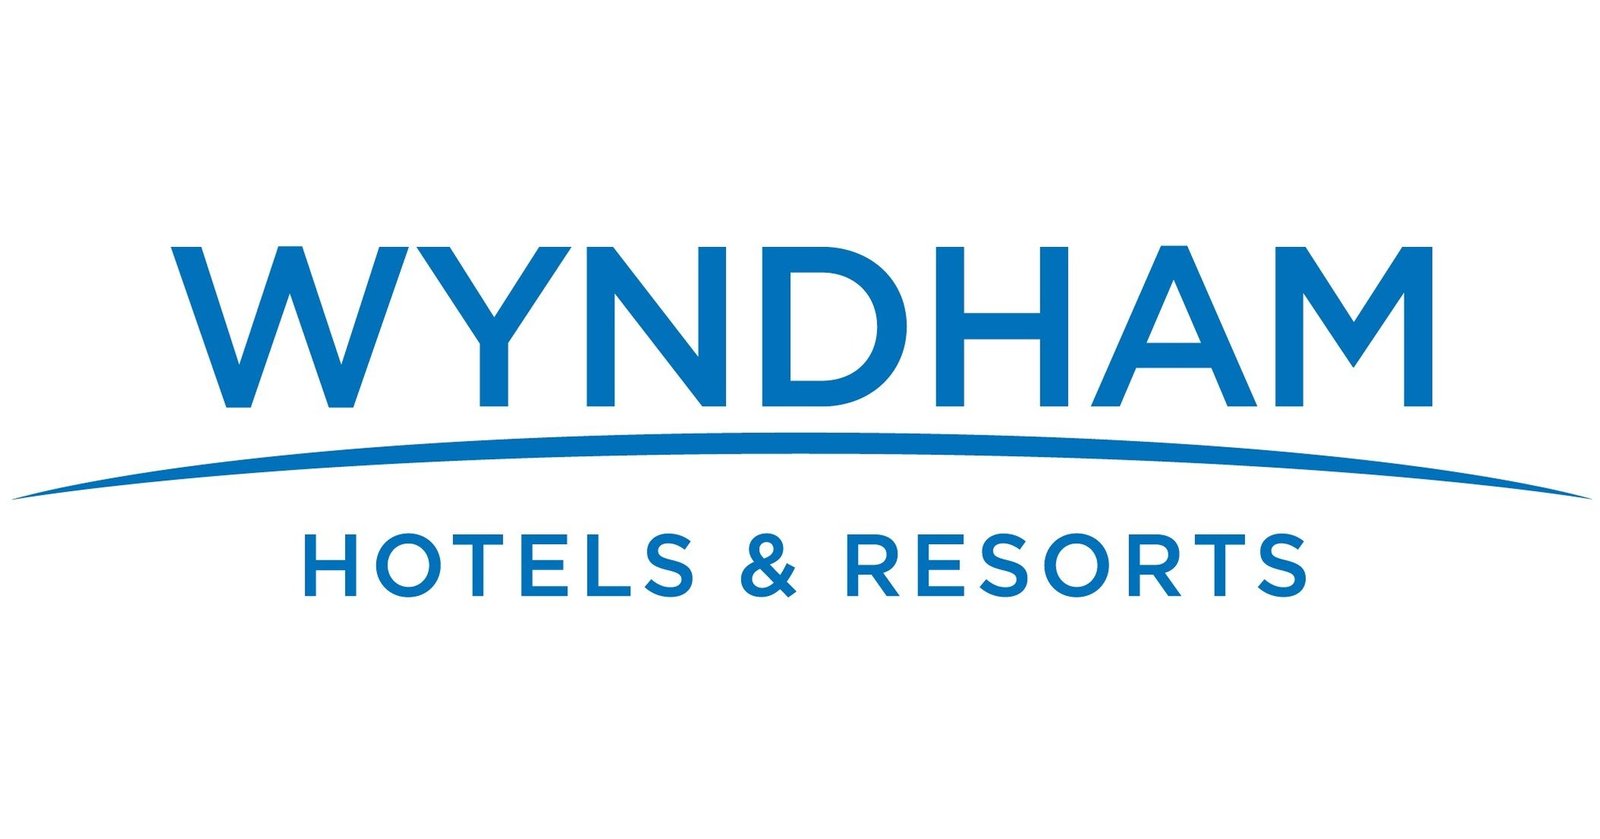 Wyndham Hotels & Resorts sees demand with travelers “All In” for All-Inclusive